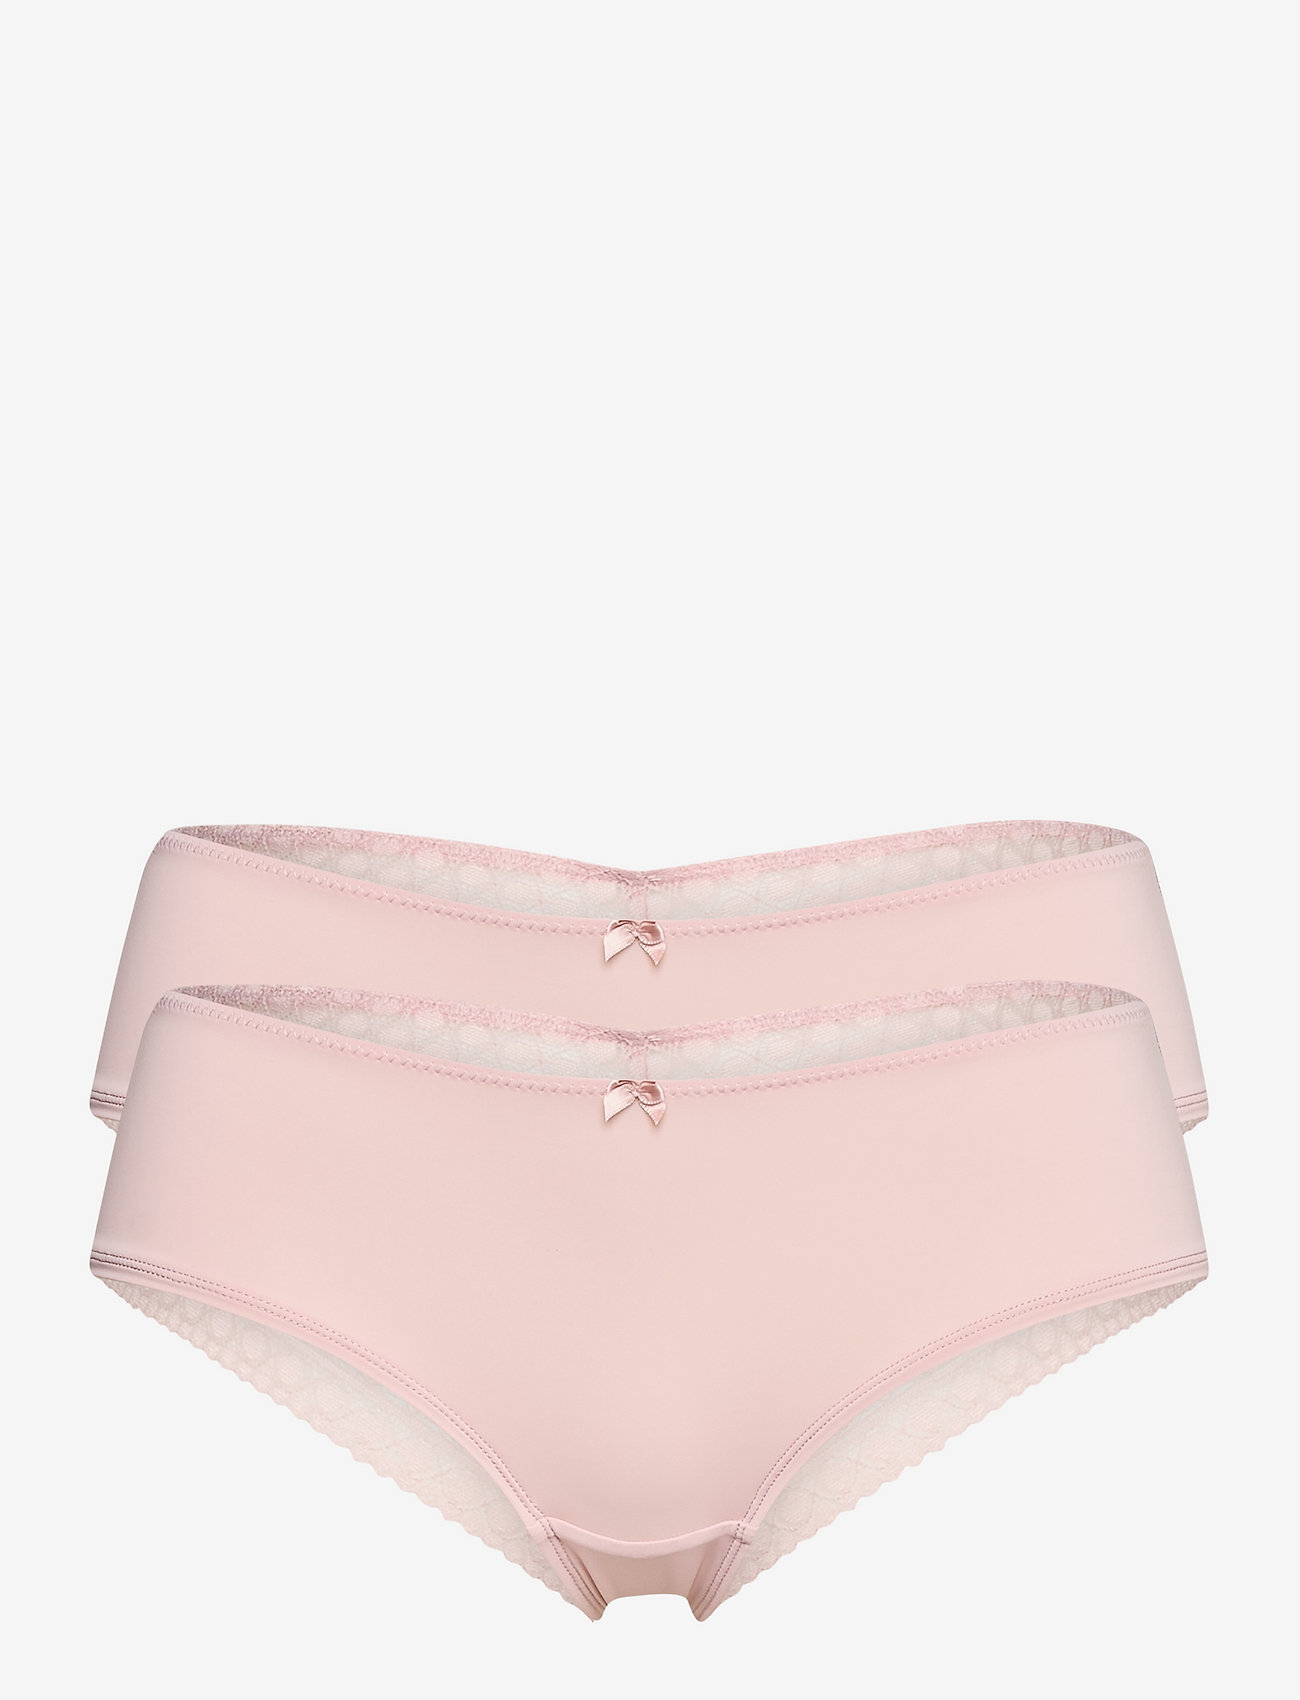 Esprit Bodywear Women - Double pack: Brazilian hipster shorts trimmed with lace - die niedrigsten preise - old pink - 0